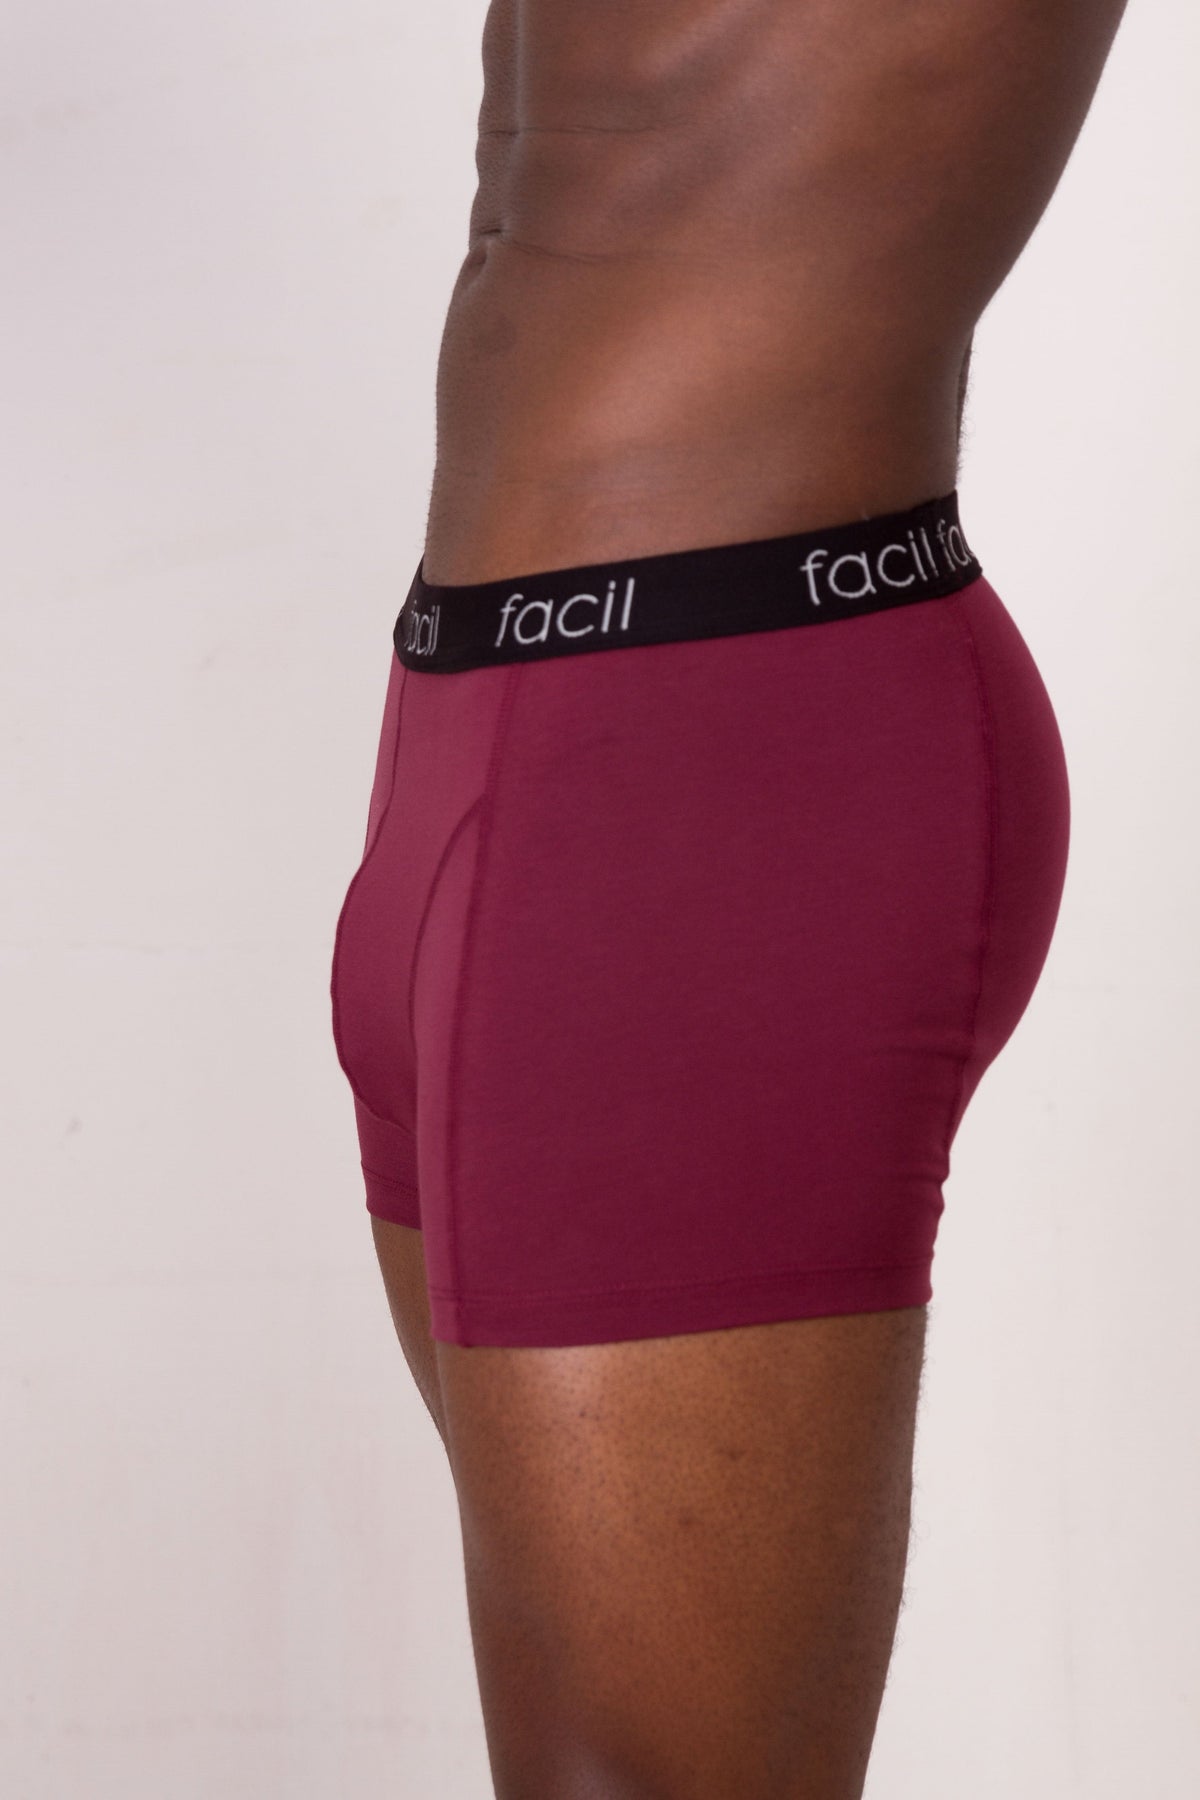 a man wearing a red boxer briefs with a black elastic waistband